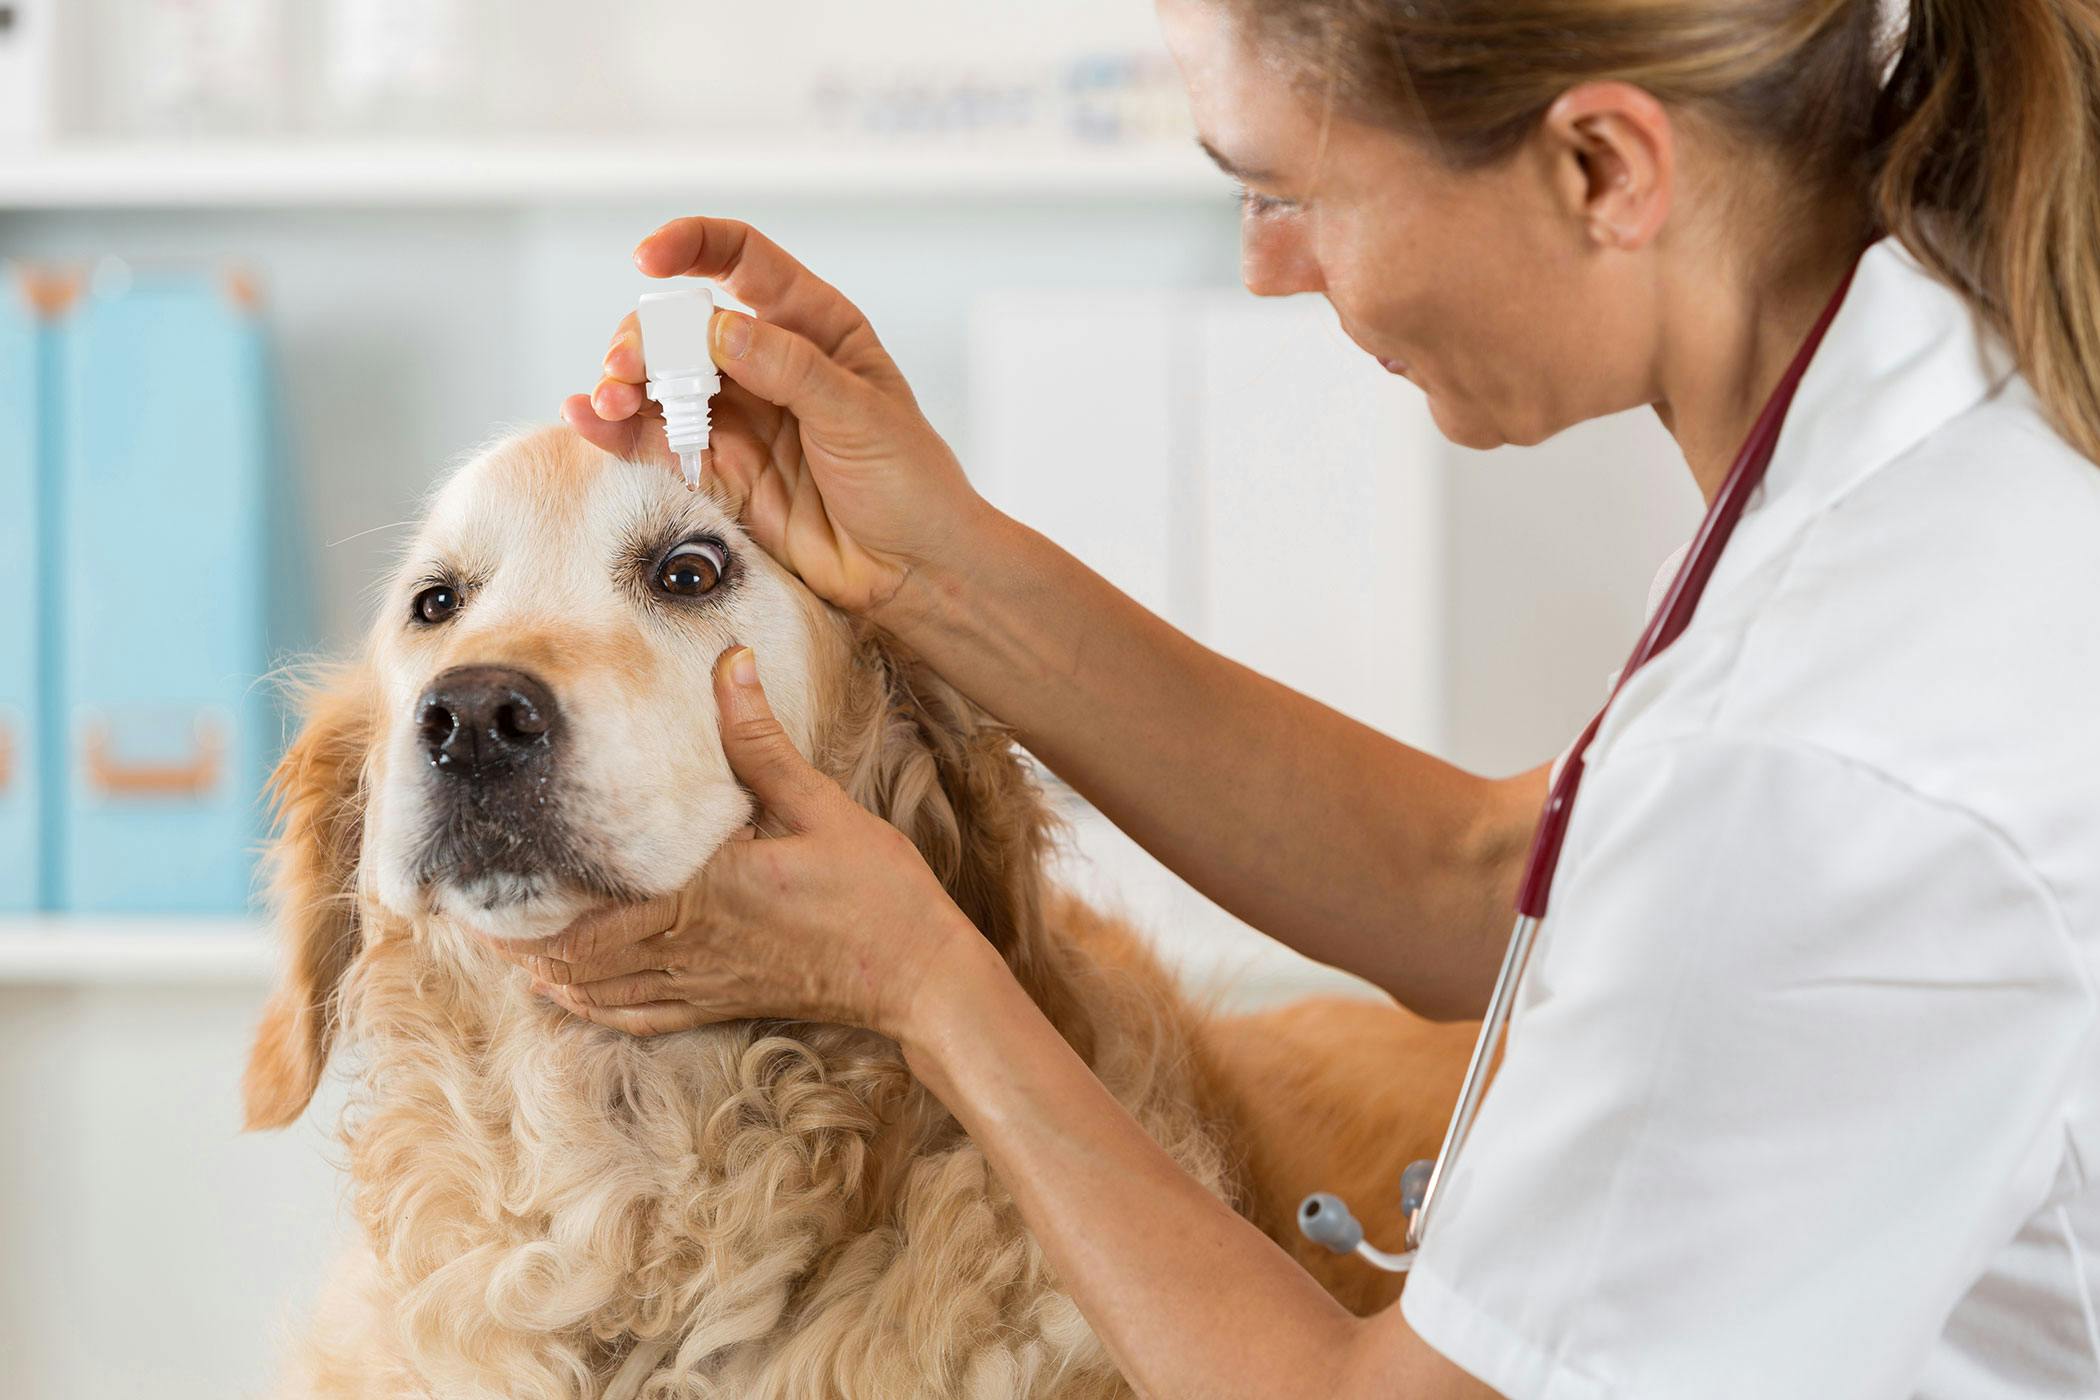 Iris Atrophy - Eye Care for Animals - Eye Care for Animals